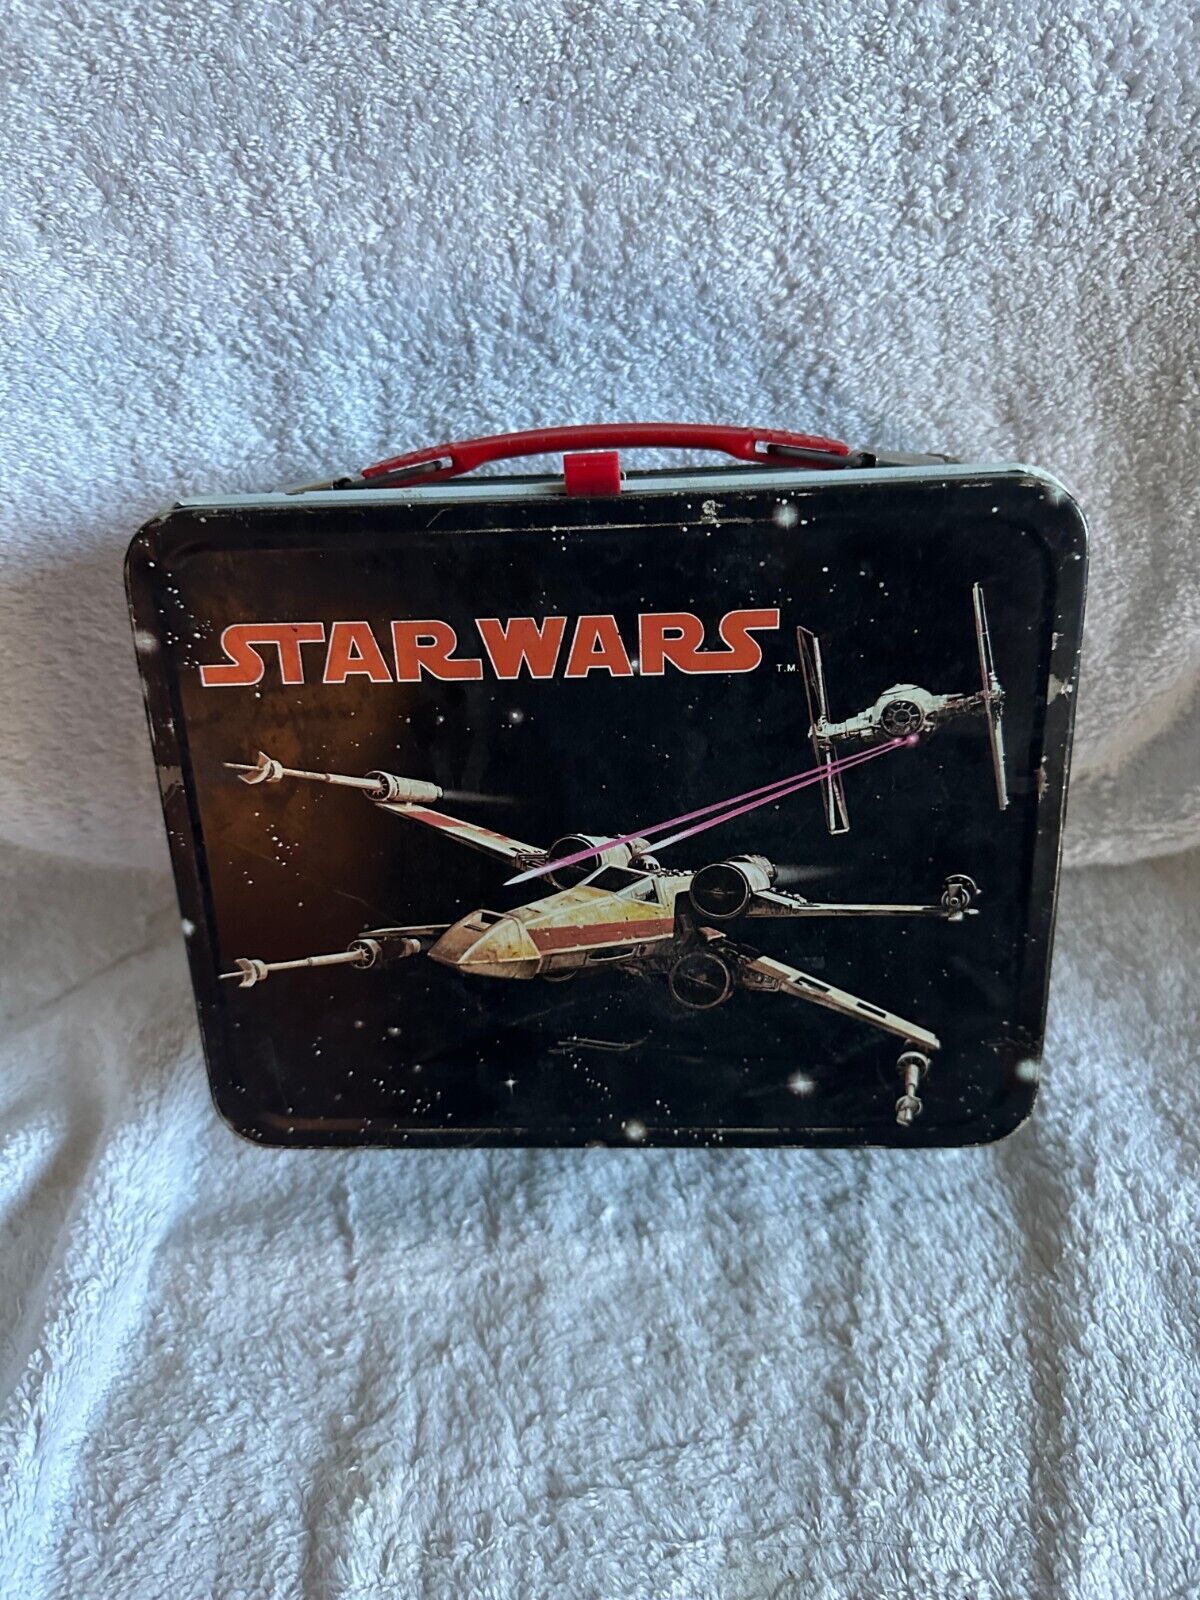 Original 1977 Star Wars metal lunch box and thermos